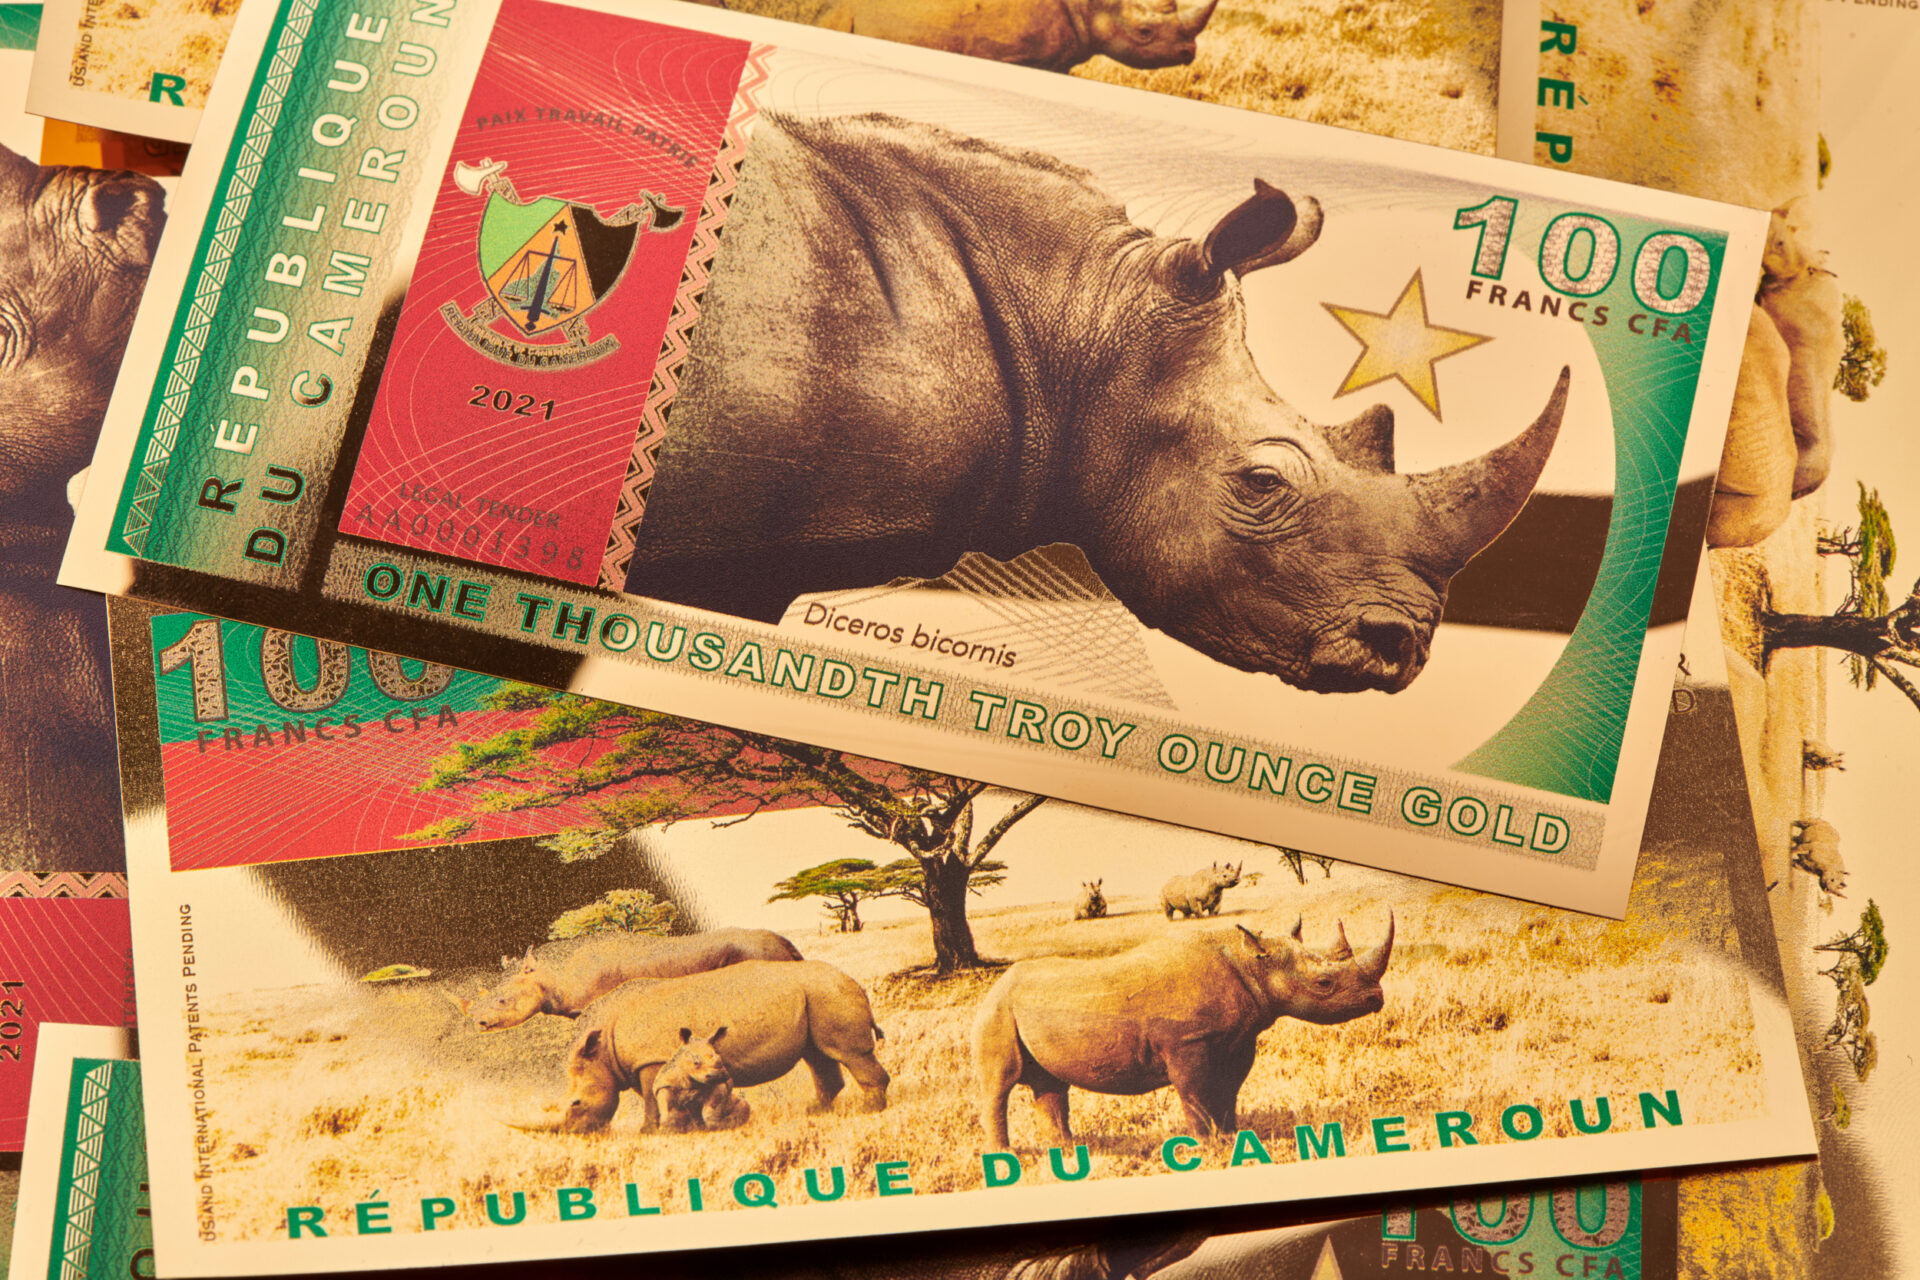 You are currently viewing New Release: Legal Tender Gold Bill “Black Rhinoceros” 100 Francs CFA